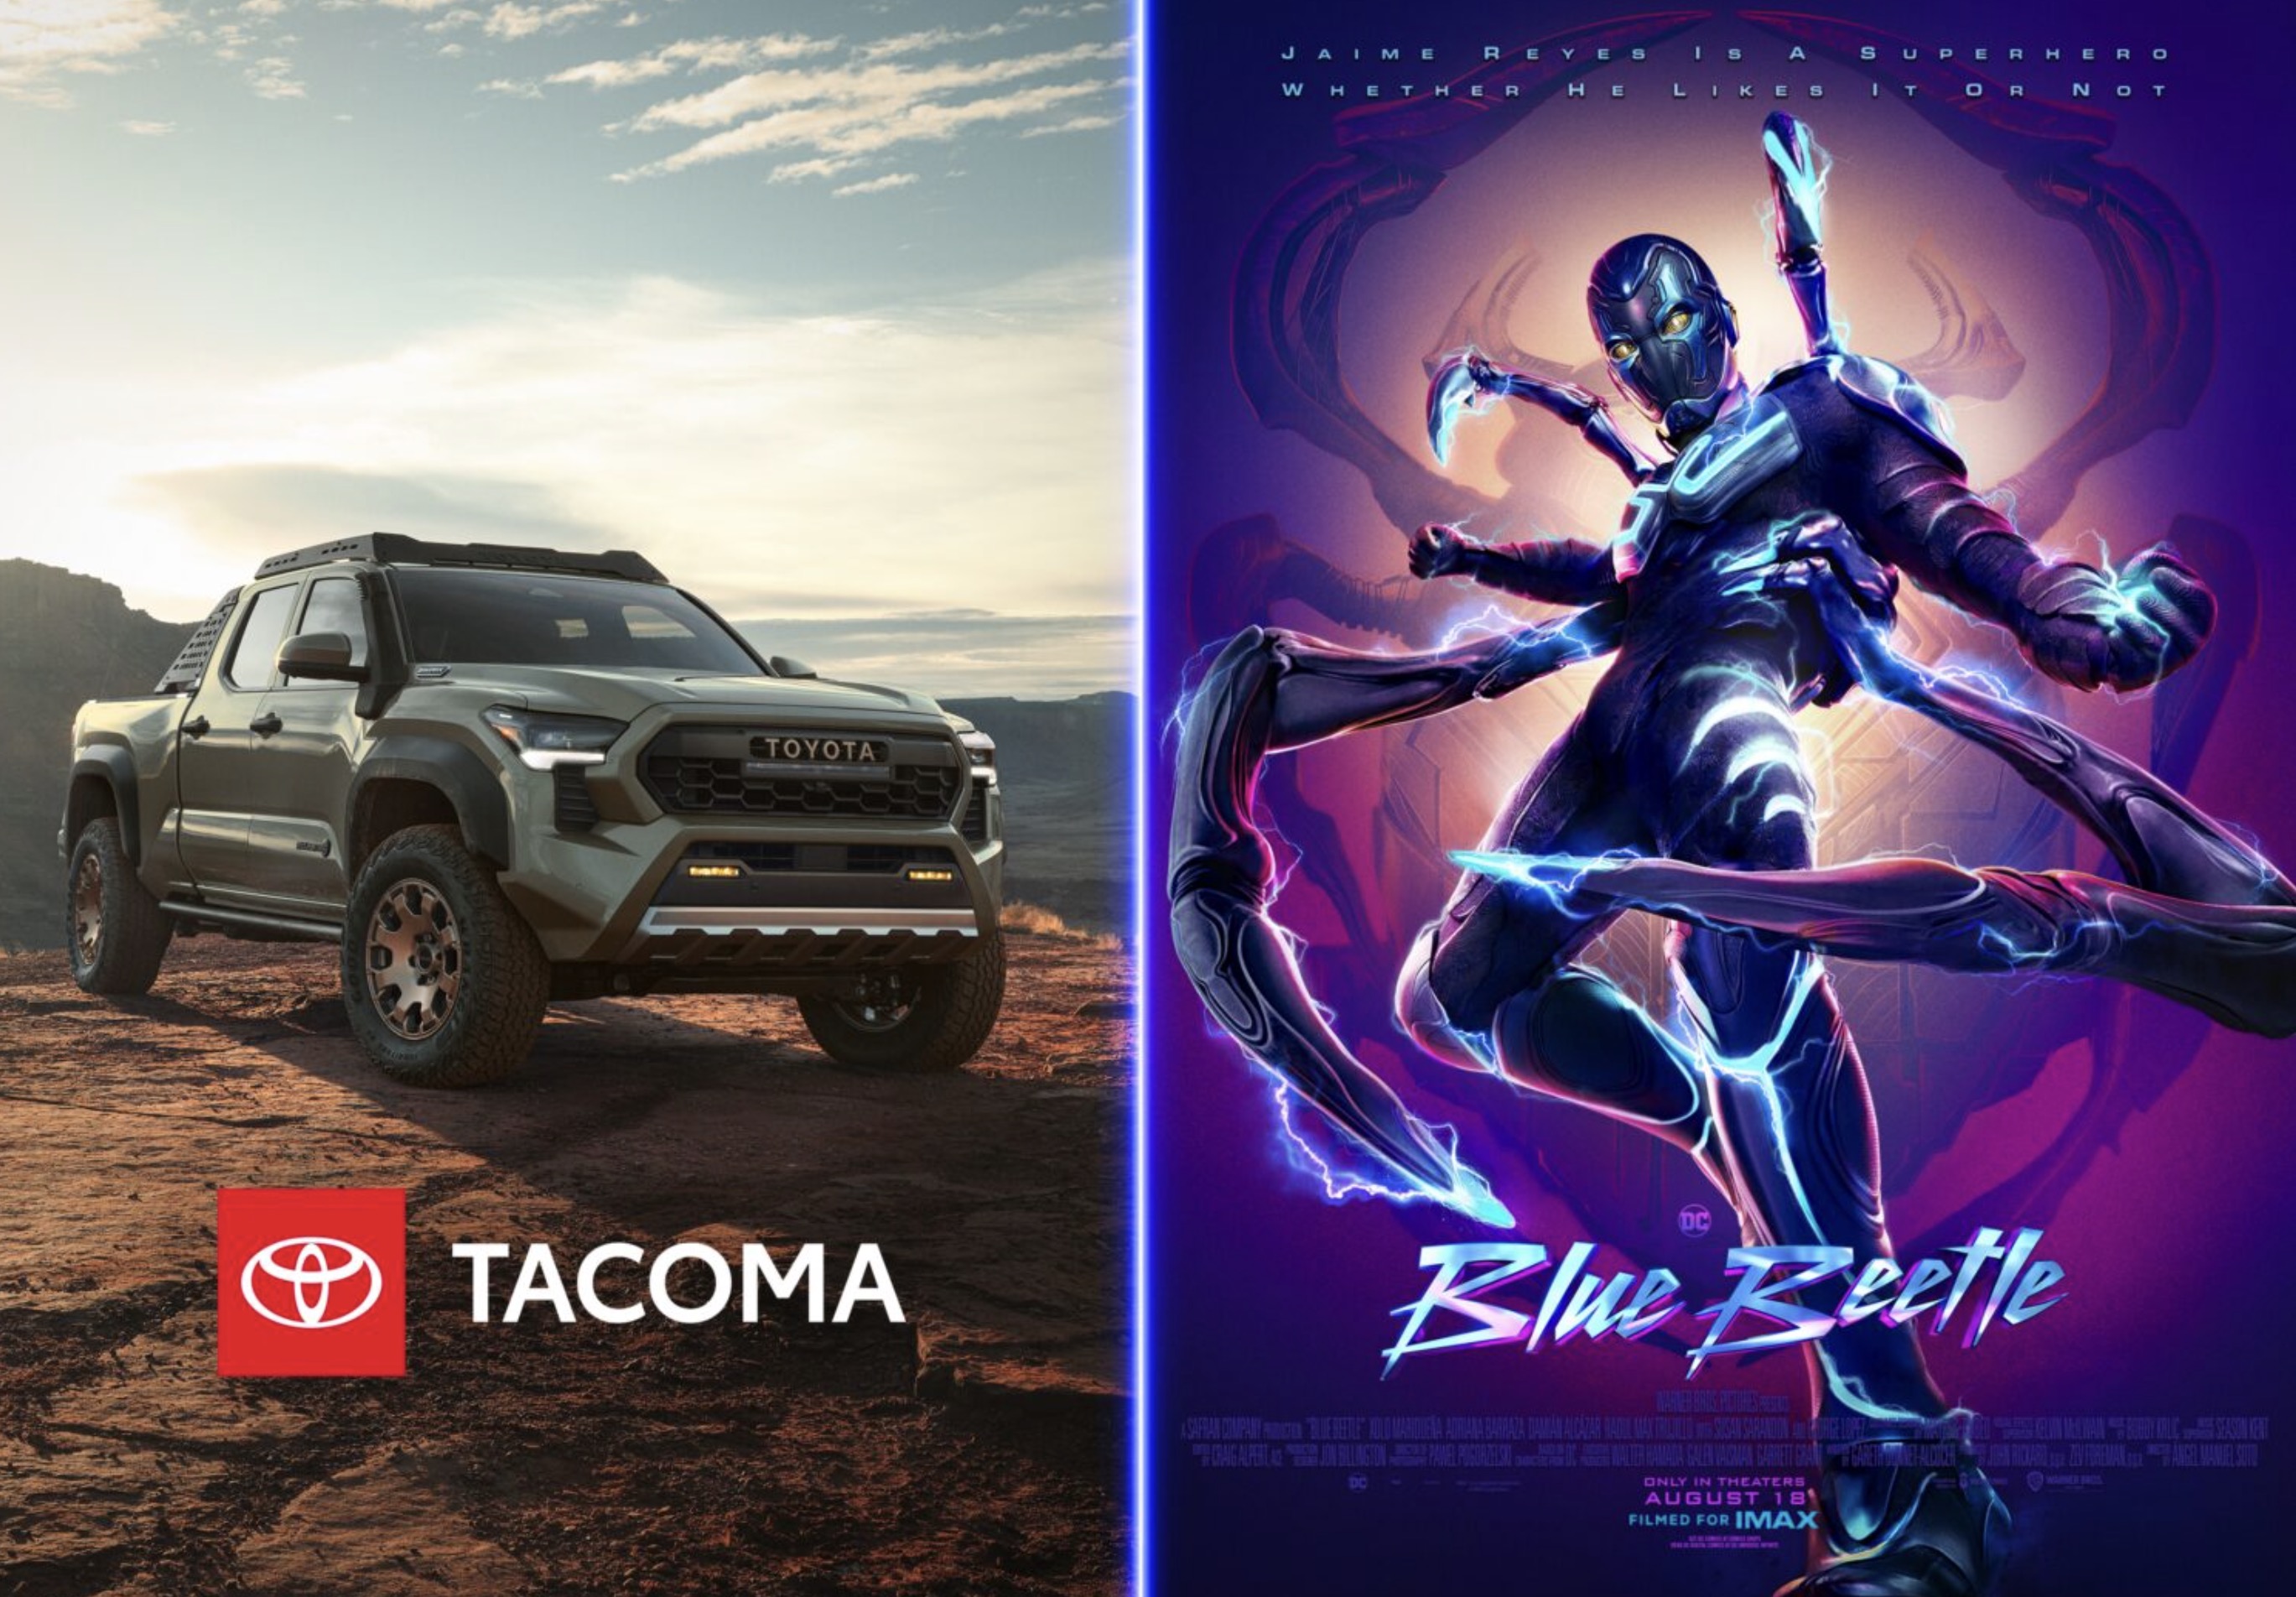 2024 Tacoma 2024 Tacoma featured in Blue Beetle Movie opening August 18 Screenshot 2023-07-25 at 8.30.59 AM